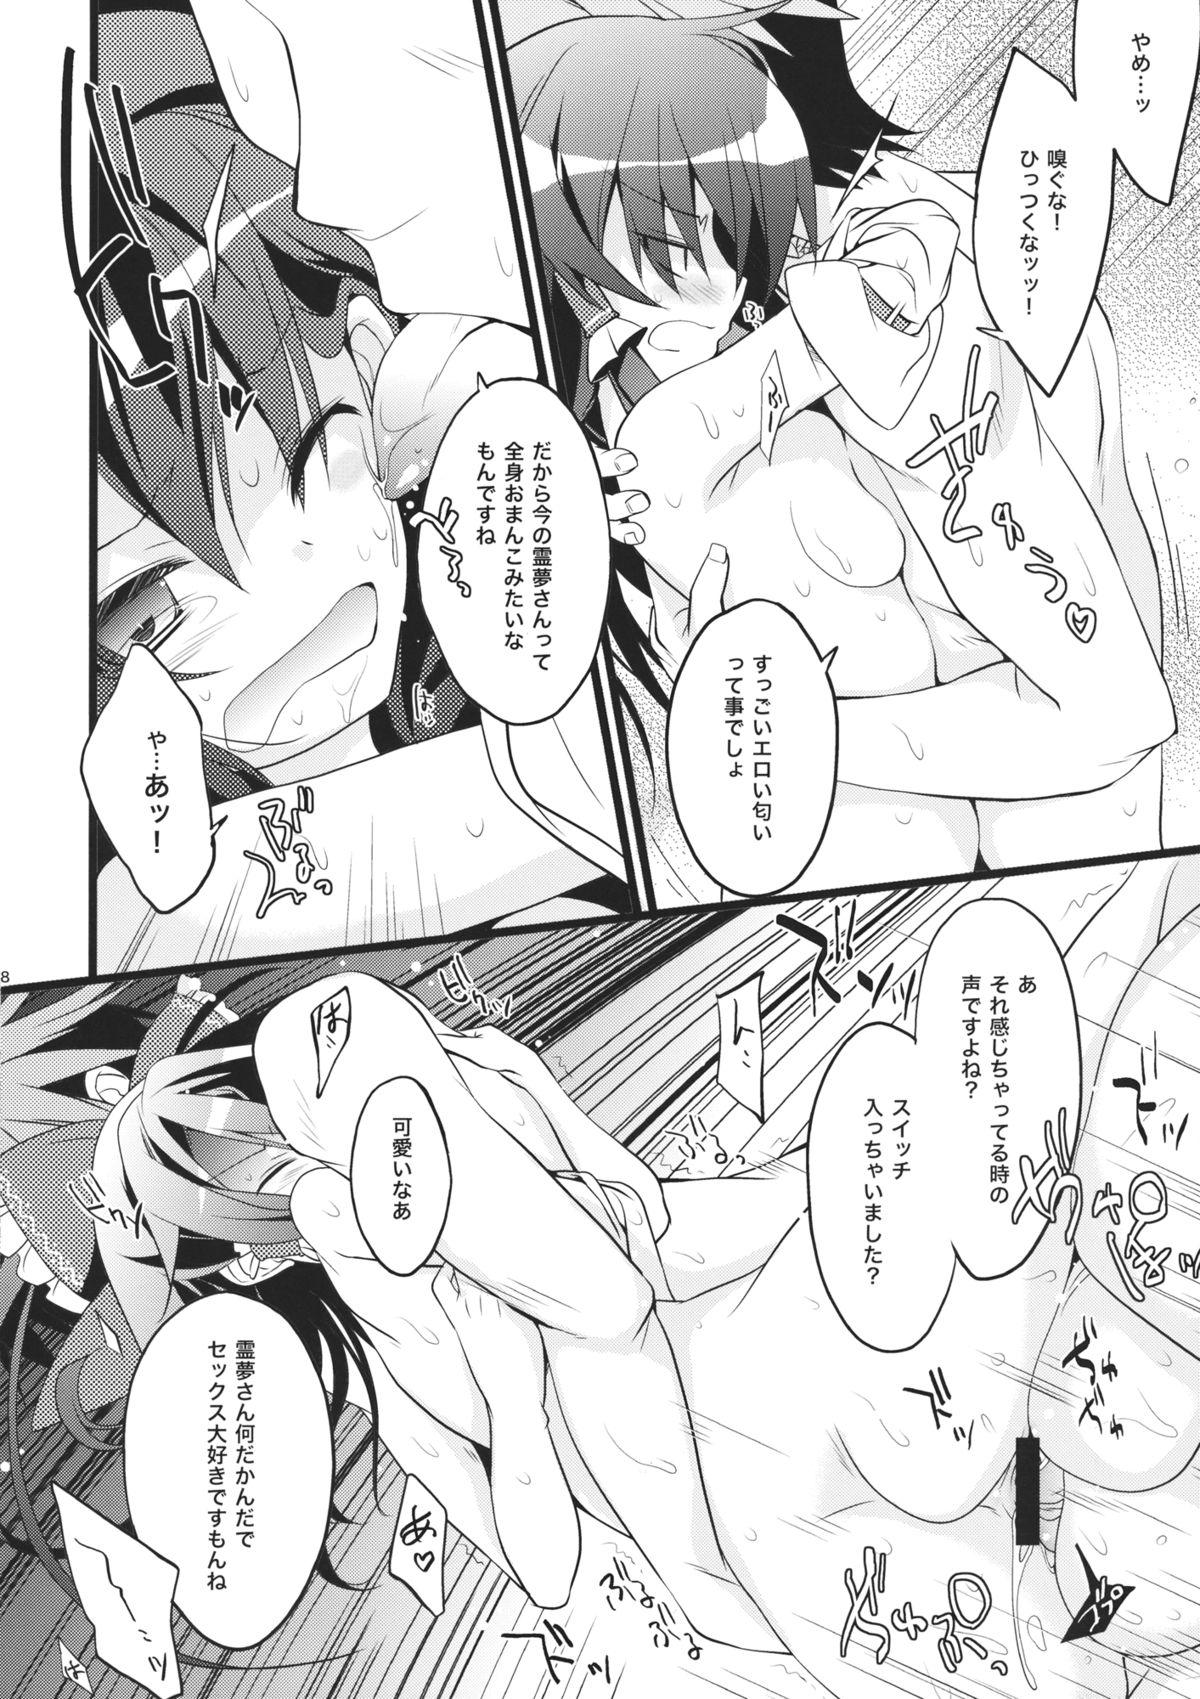 Punheta SUMMER SUMMER summer summer Go Go SUMMER-sex - Touhou project Que - Page 7